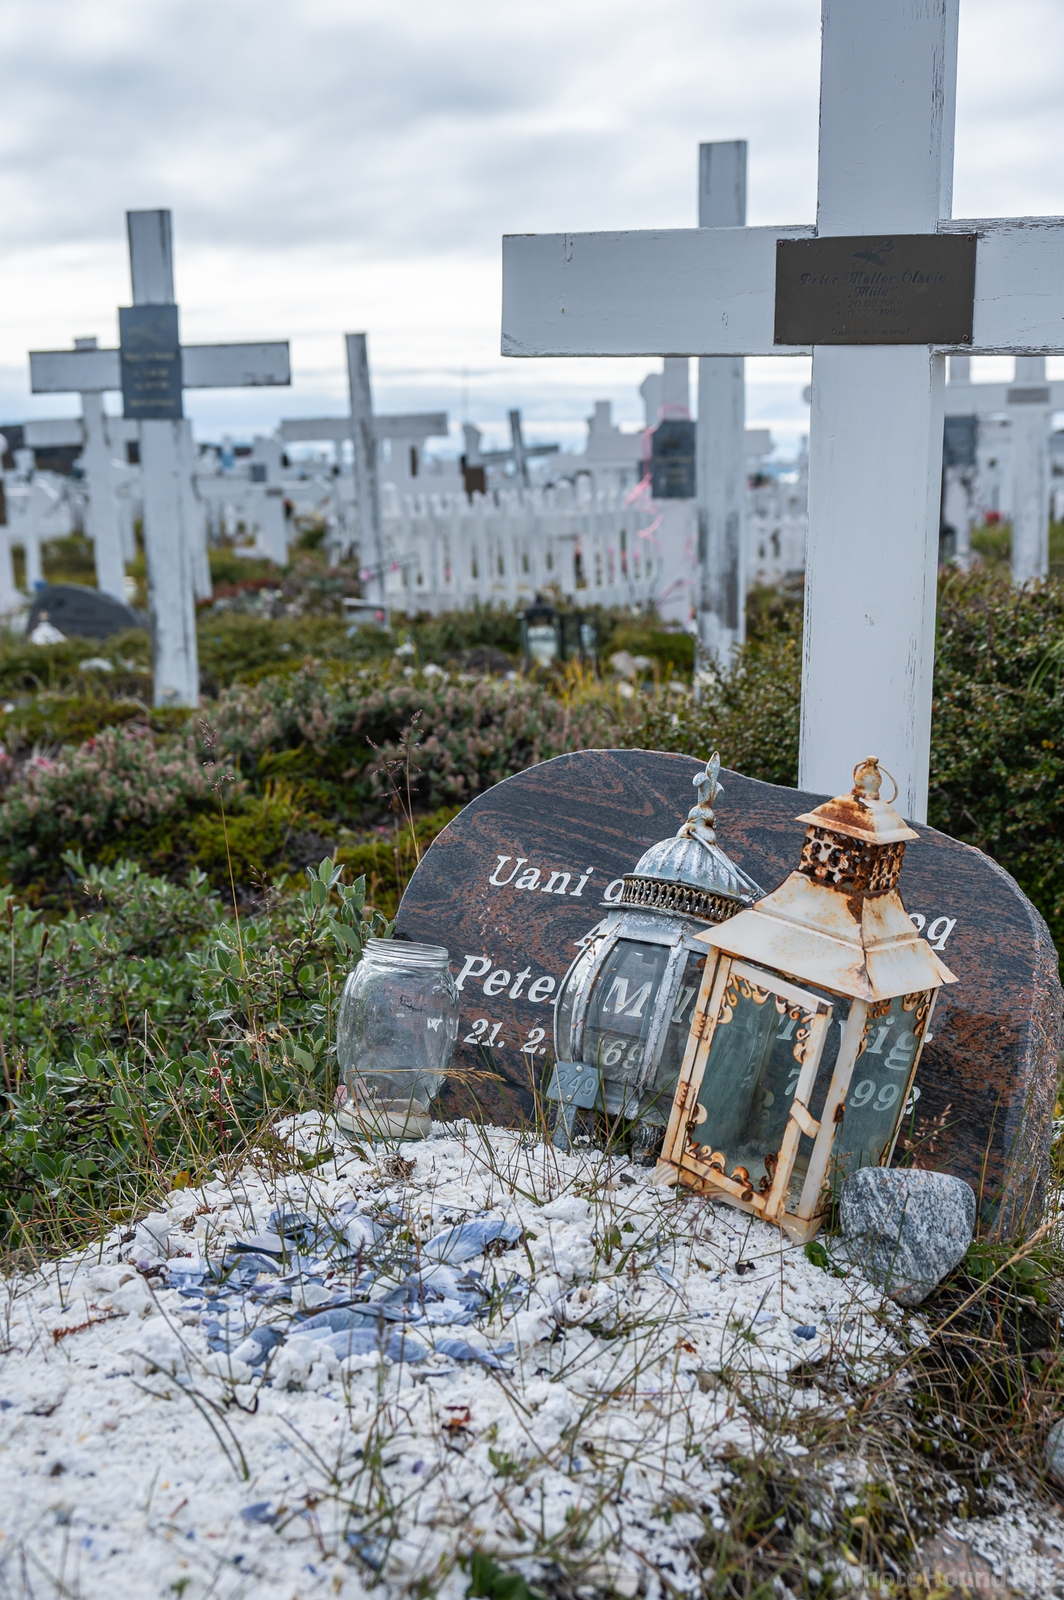 Image of Ilulissat Cemetery by Sue Wolfe